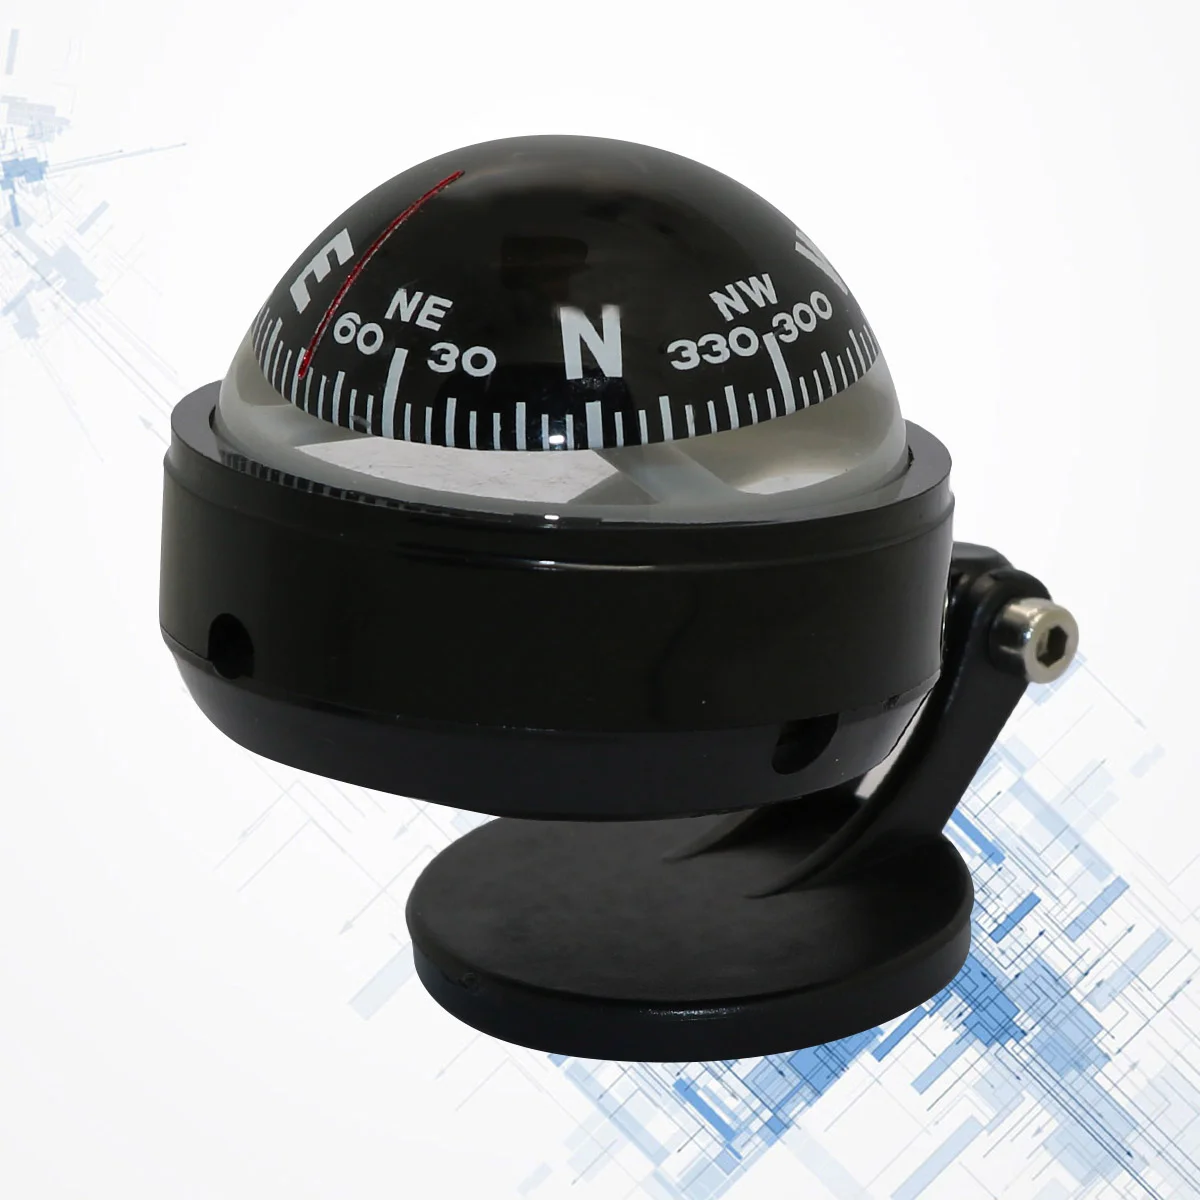 

LC500 Car Compass Navigation Car Dashboard Compass Cycling Hiking Direction Pointing Guide Ball with Magnetic Declination